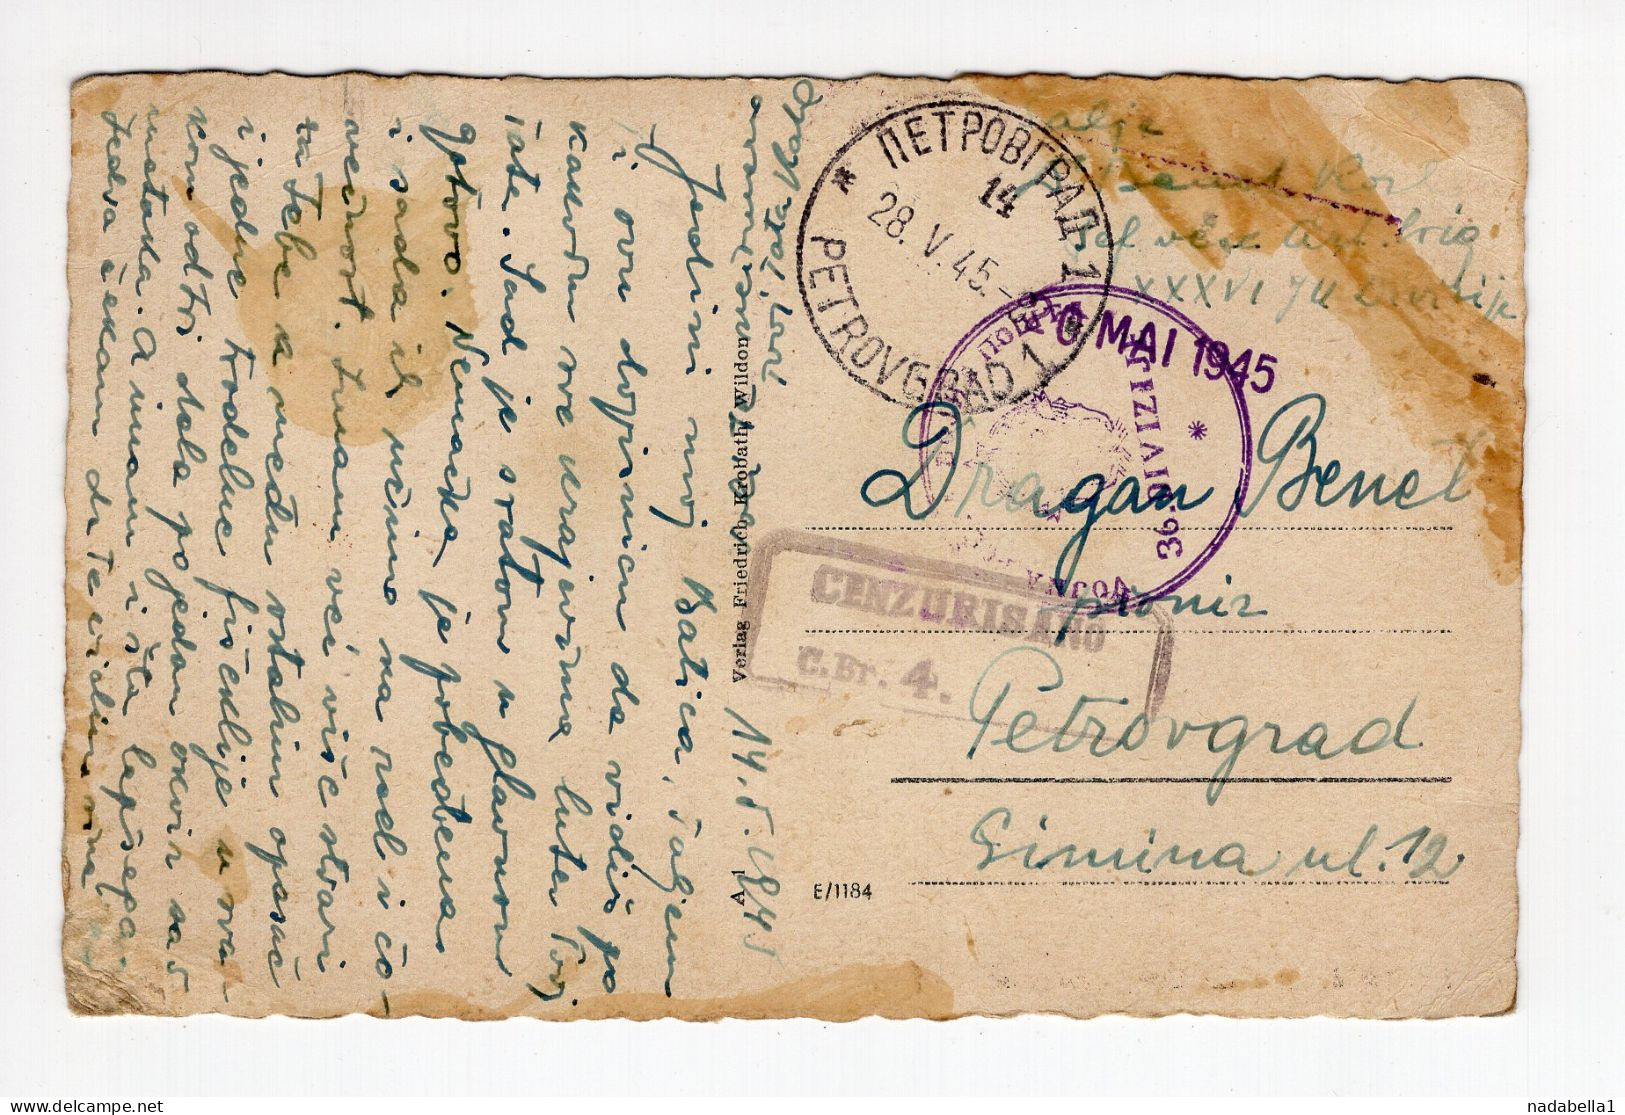 14.5.1945. YUGOSLAVIA,MILITARY,PARTIZAN MAIL,CENSOR,36 DIVISION,FROM FRONT LINE,AUSTRIA? TO SERBIA,POSTCARD,USED - Covers & Documents